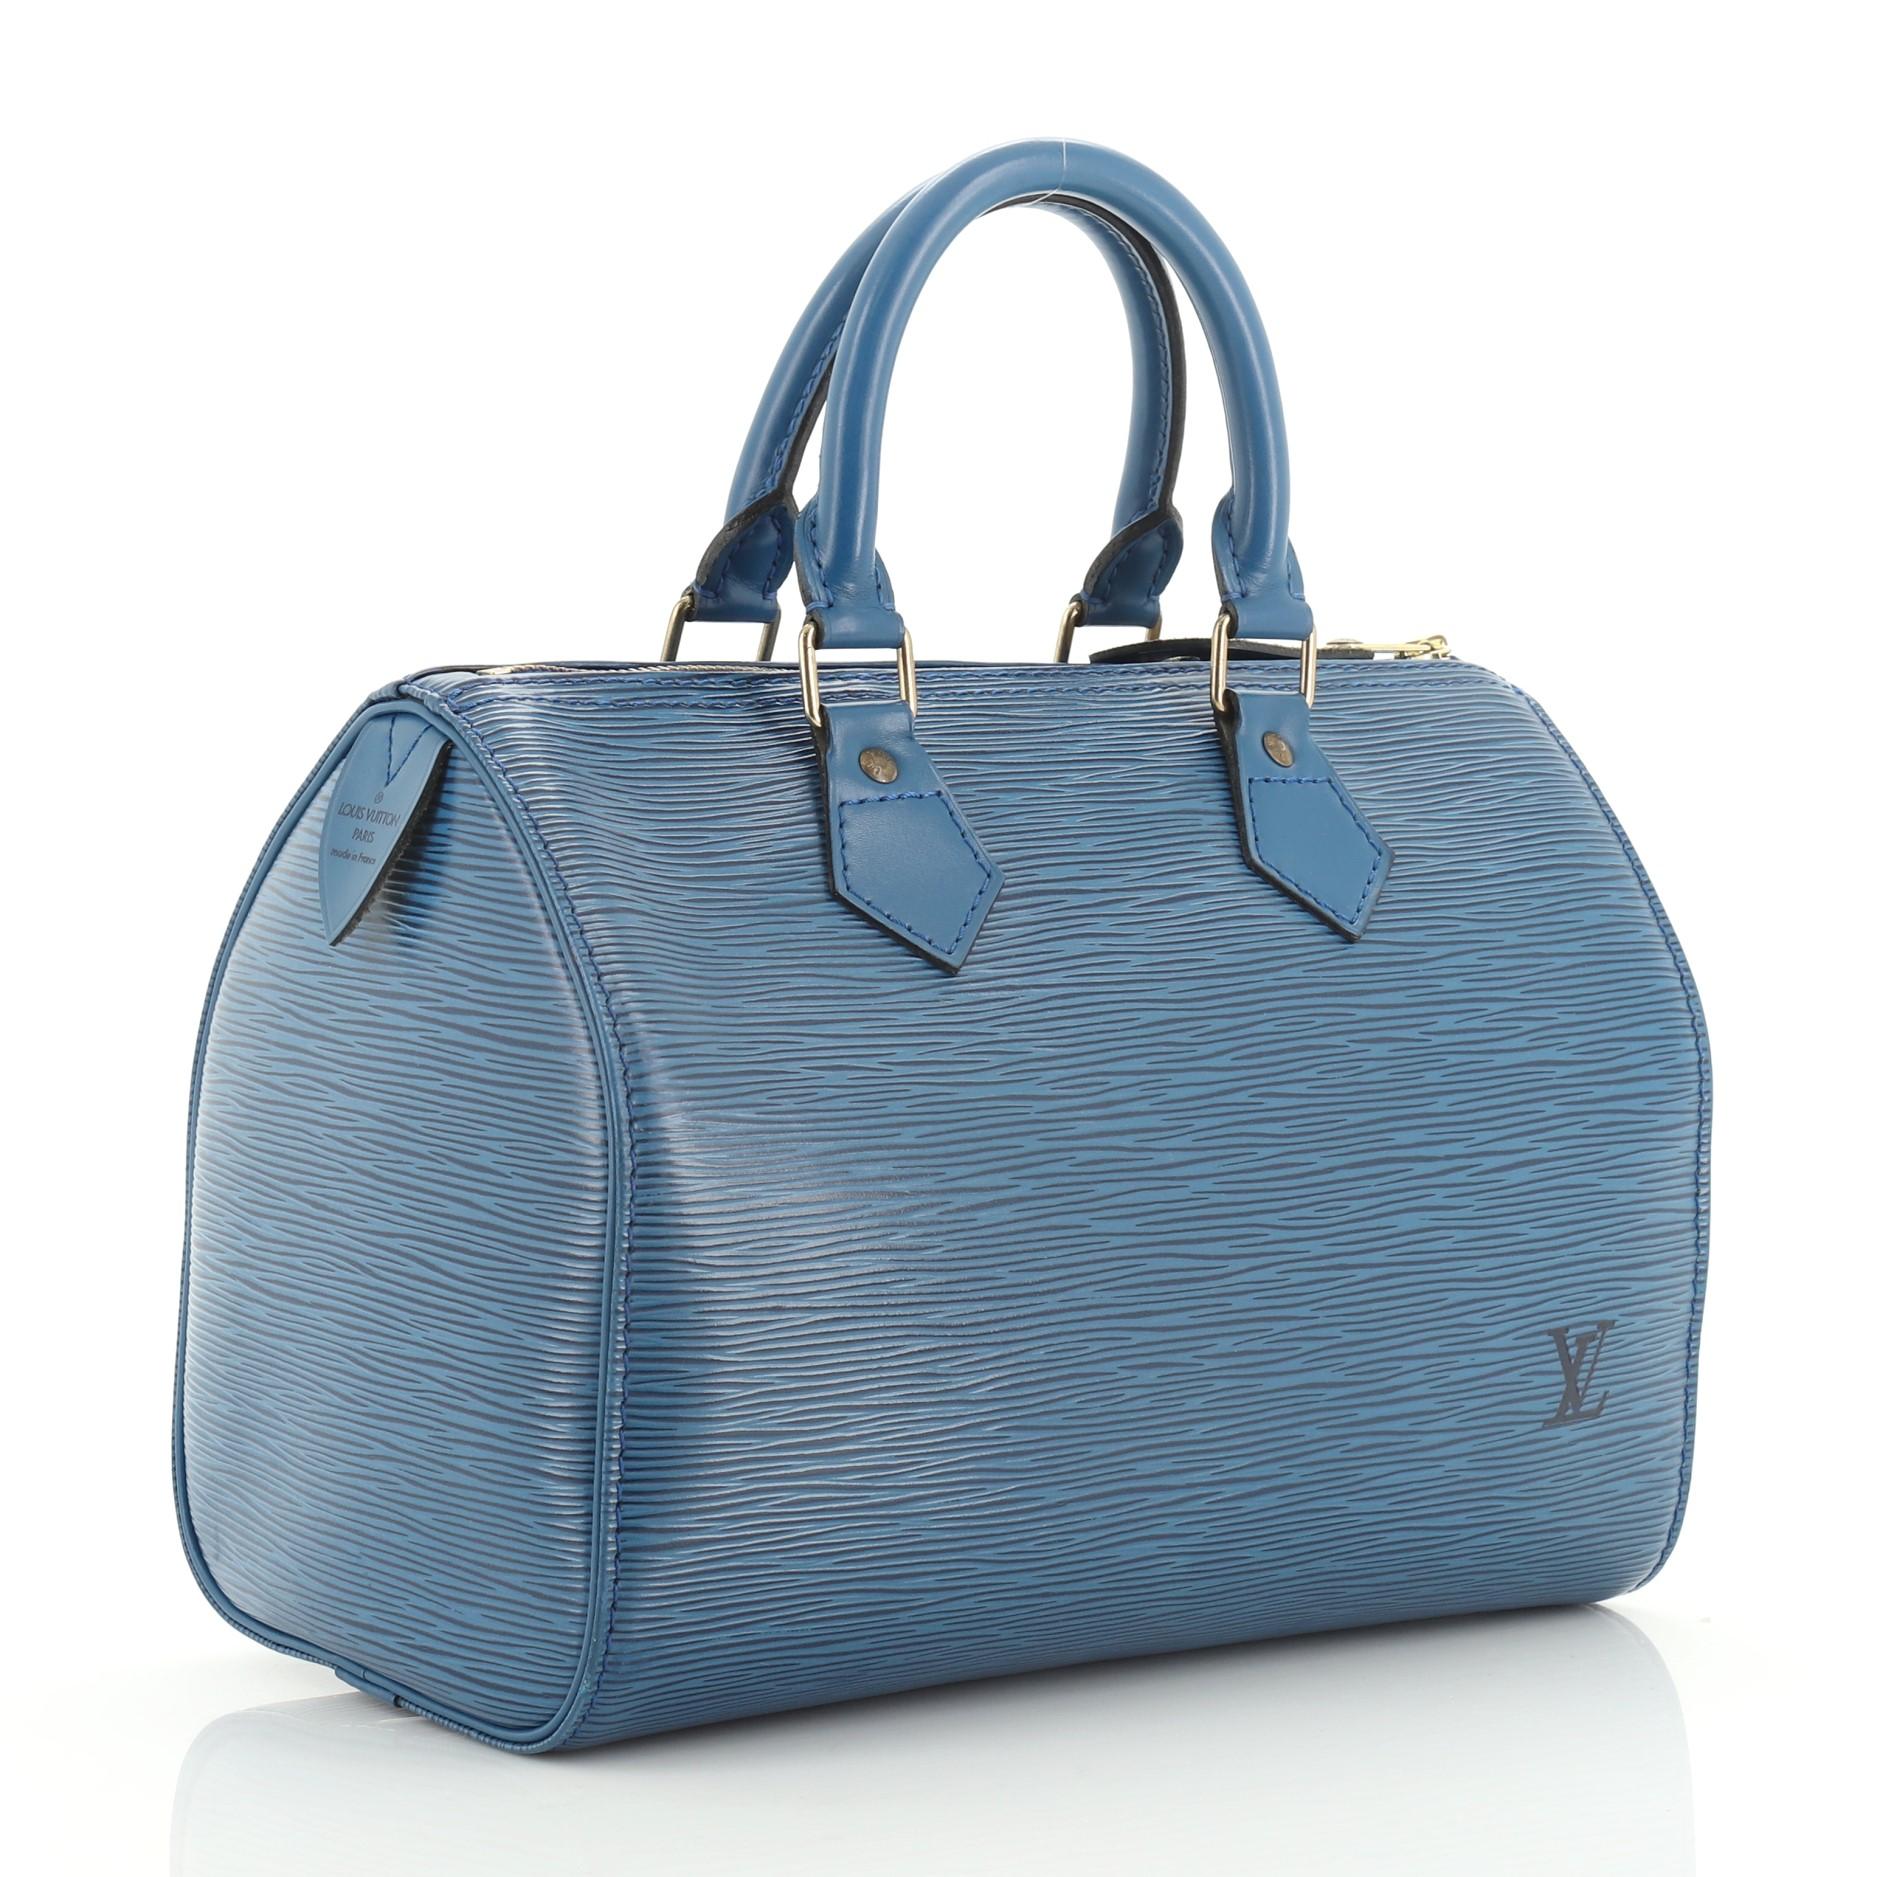 This Louis Vuitton Speedy Handbag Epi Leather 25 is an everyday bag designed as a smaller interpretation of the Keepall bag. Crafted from blue epi leather, features dual rolled leather handles, exterior side pocket, and gold-tone hardware. Its zip